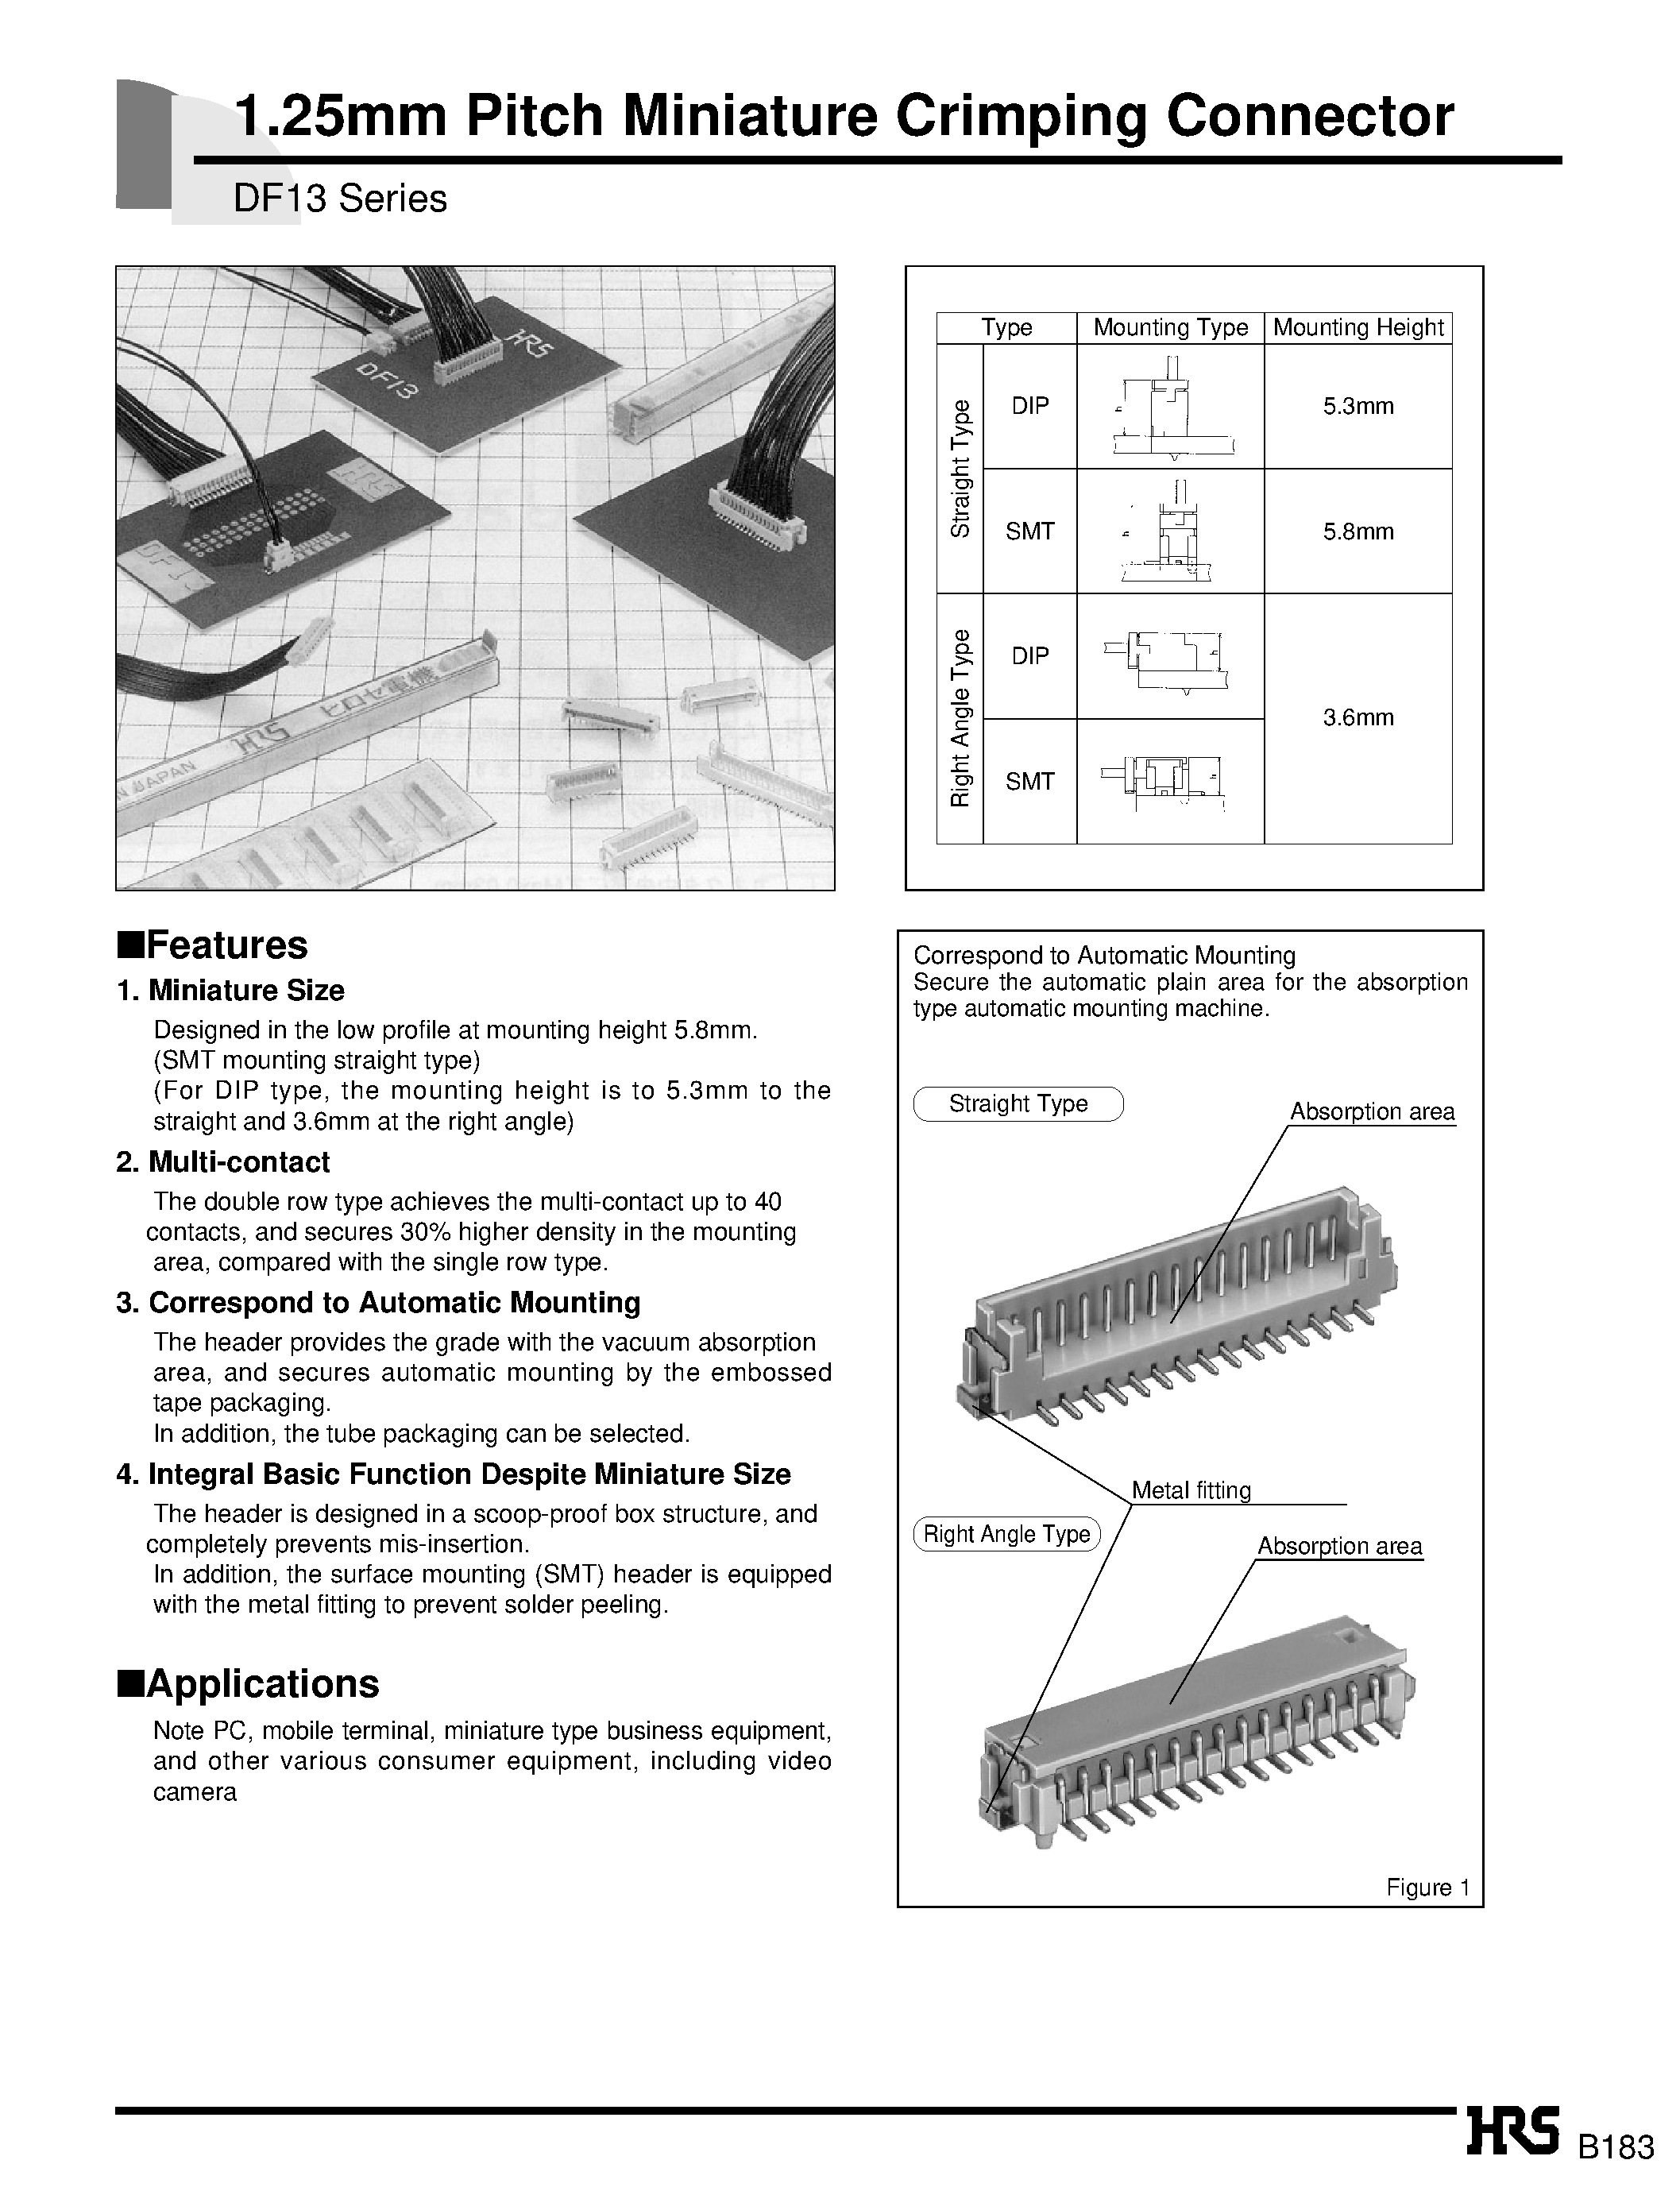 Datasheet DF13-11P-1.25H - 1.25mm Pitch Miniature Crimping Connector page 1